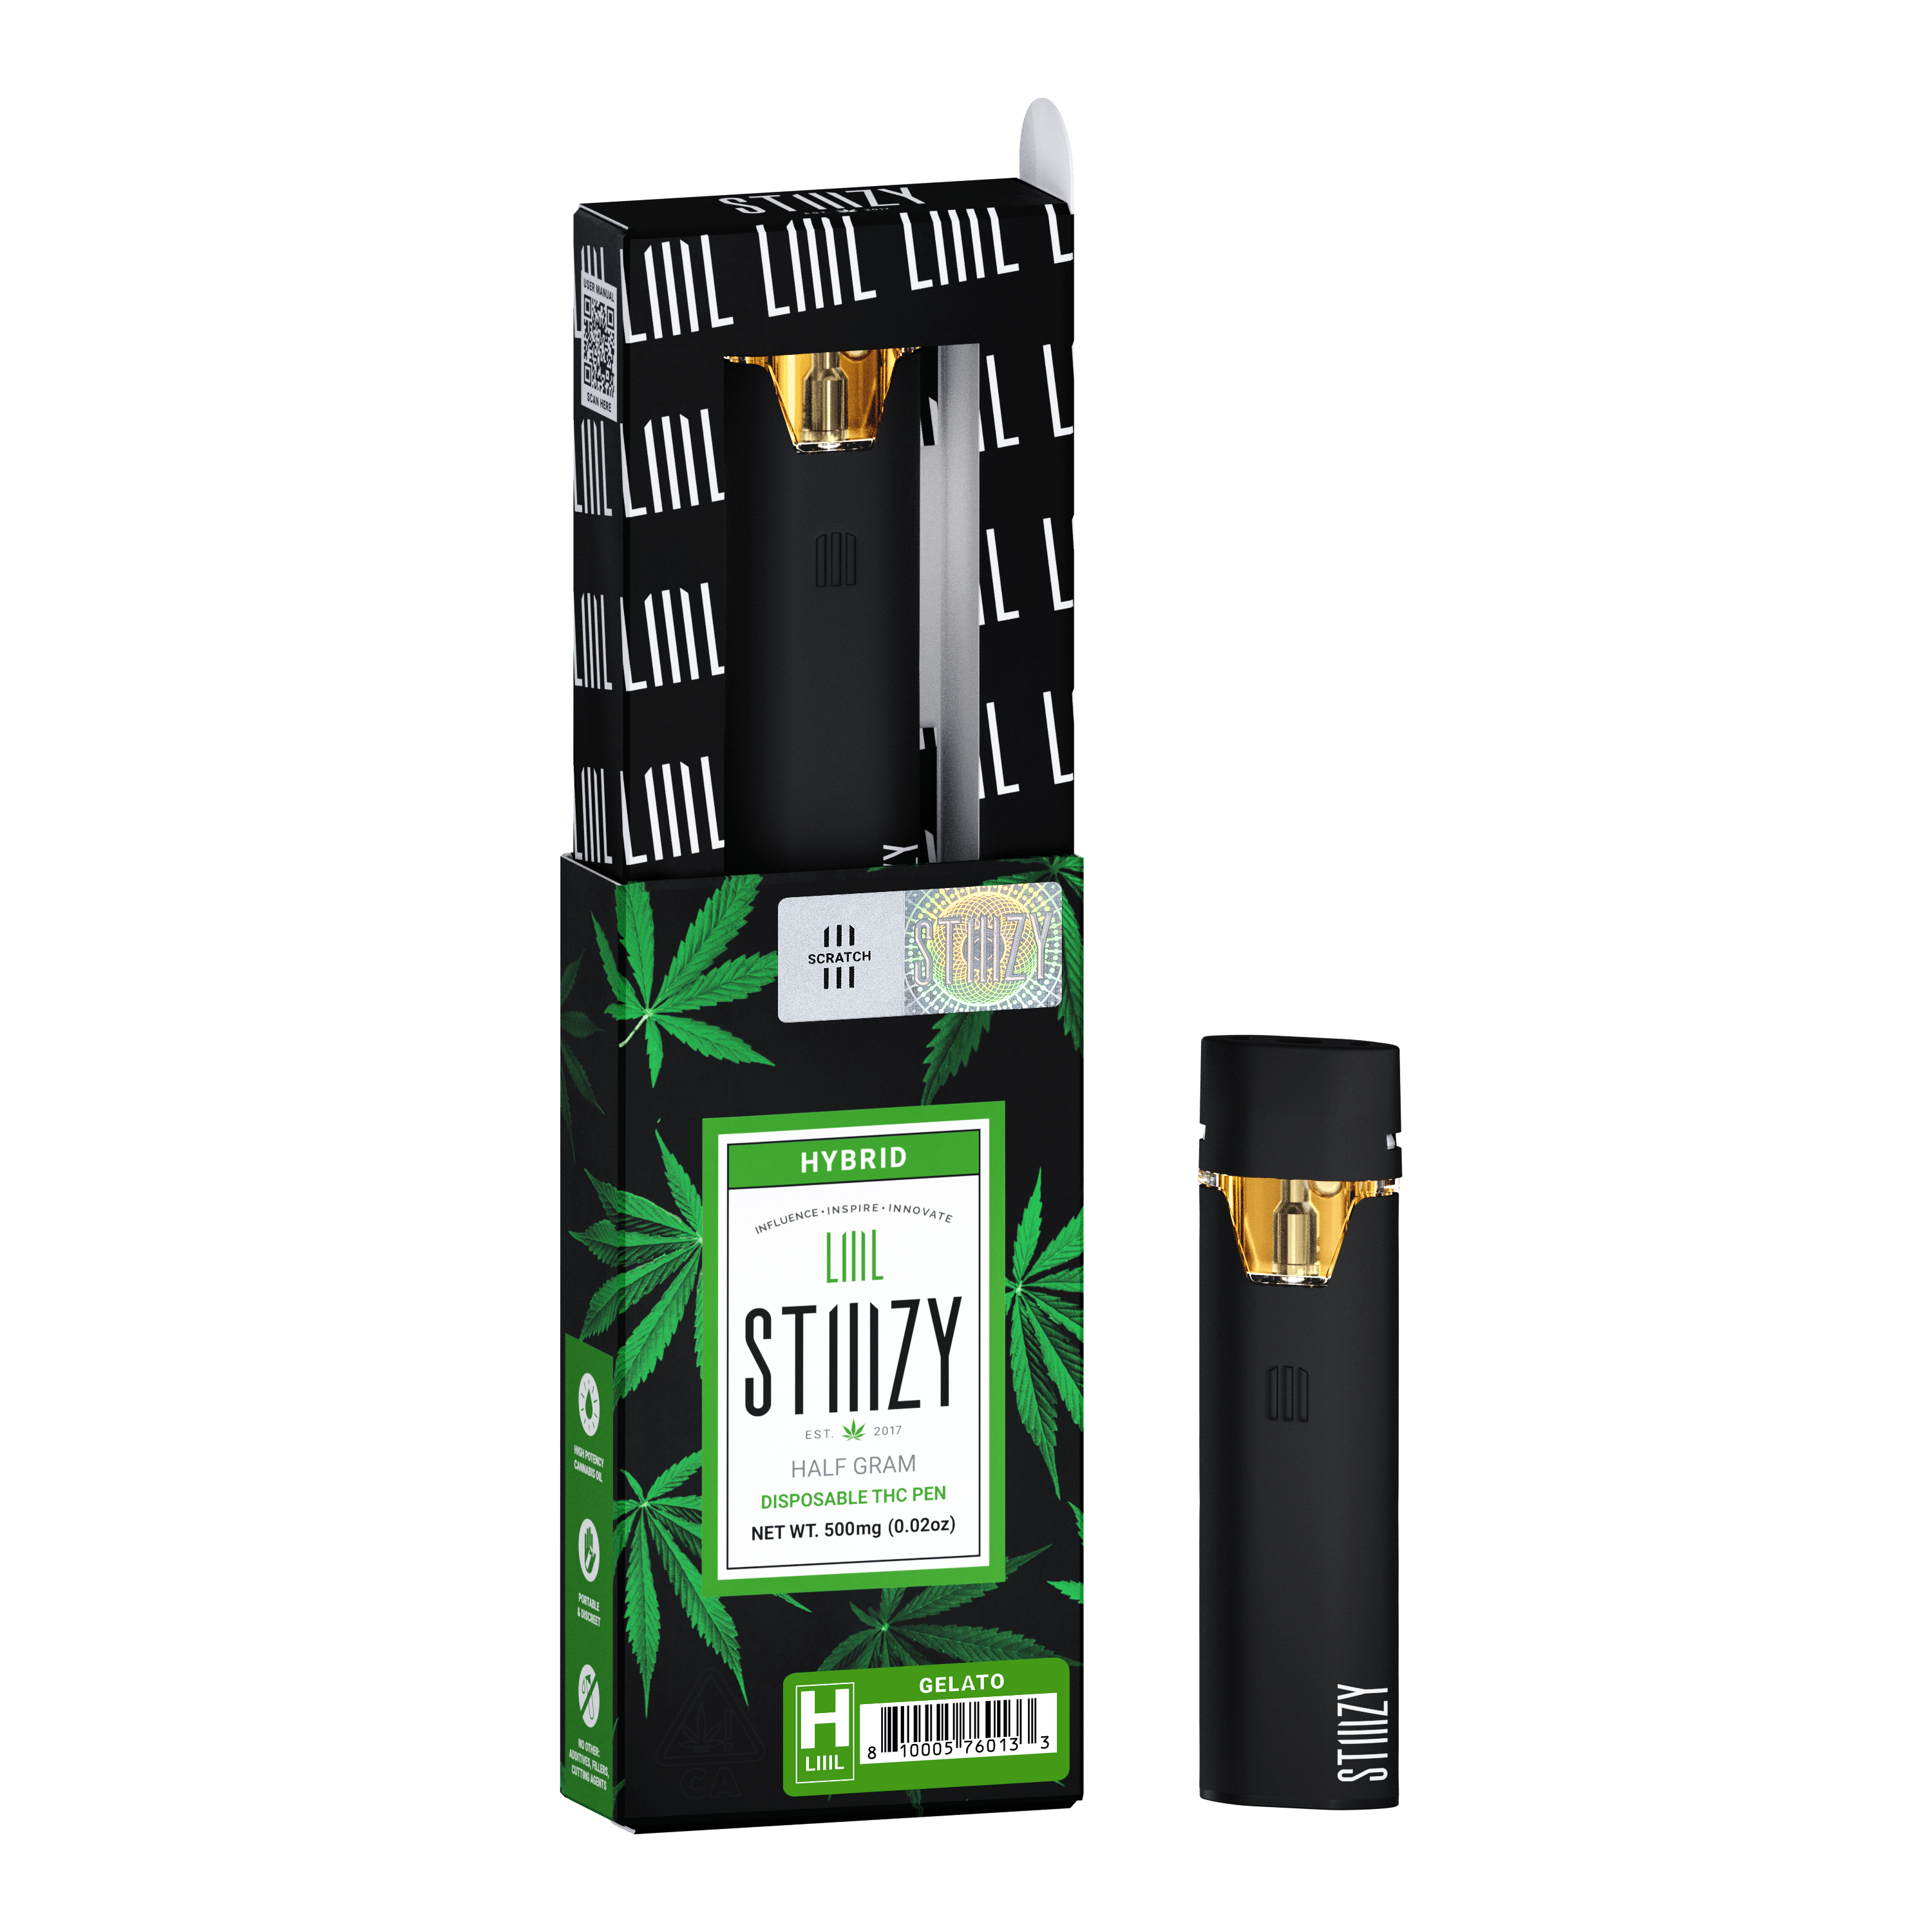 A disposable weed pen with distillate derived from the Gelato strain stands next to its black box.